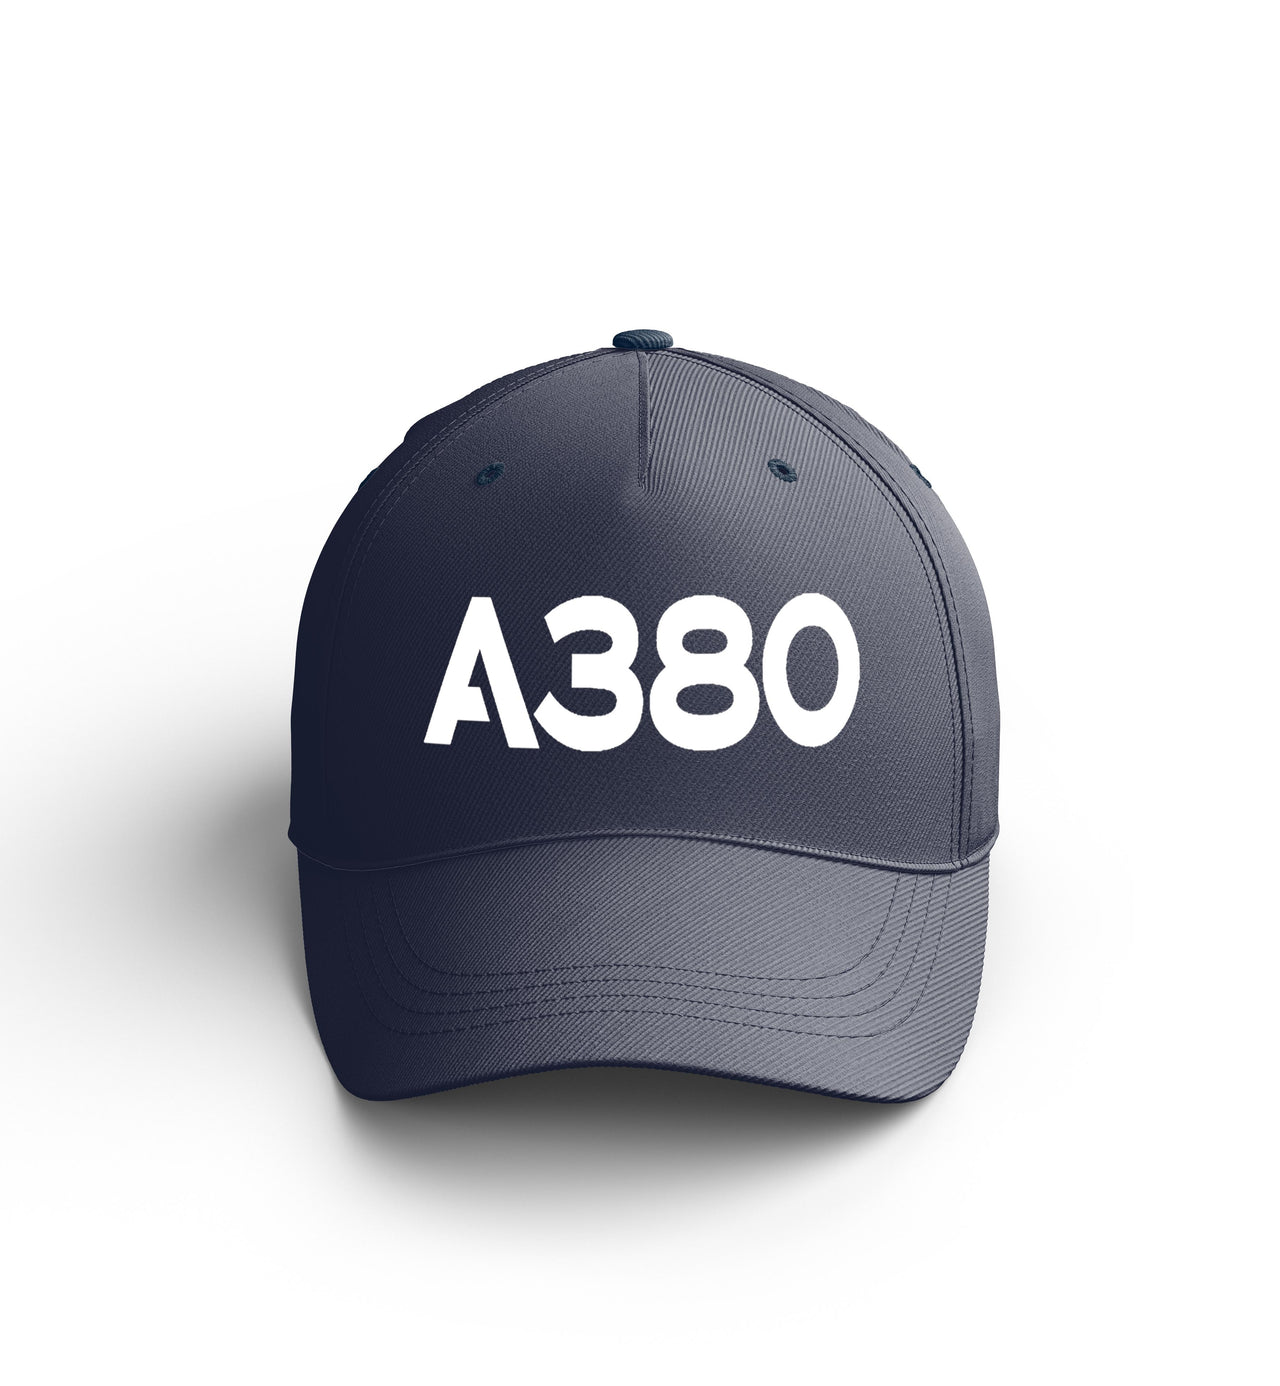 Customizable Name & A380 Flat Text Embroidered Hats